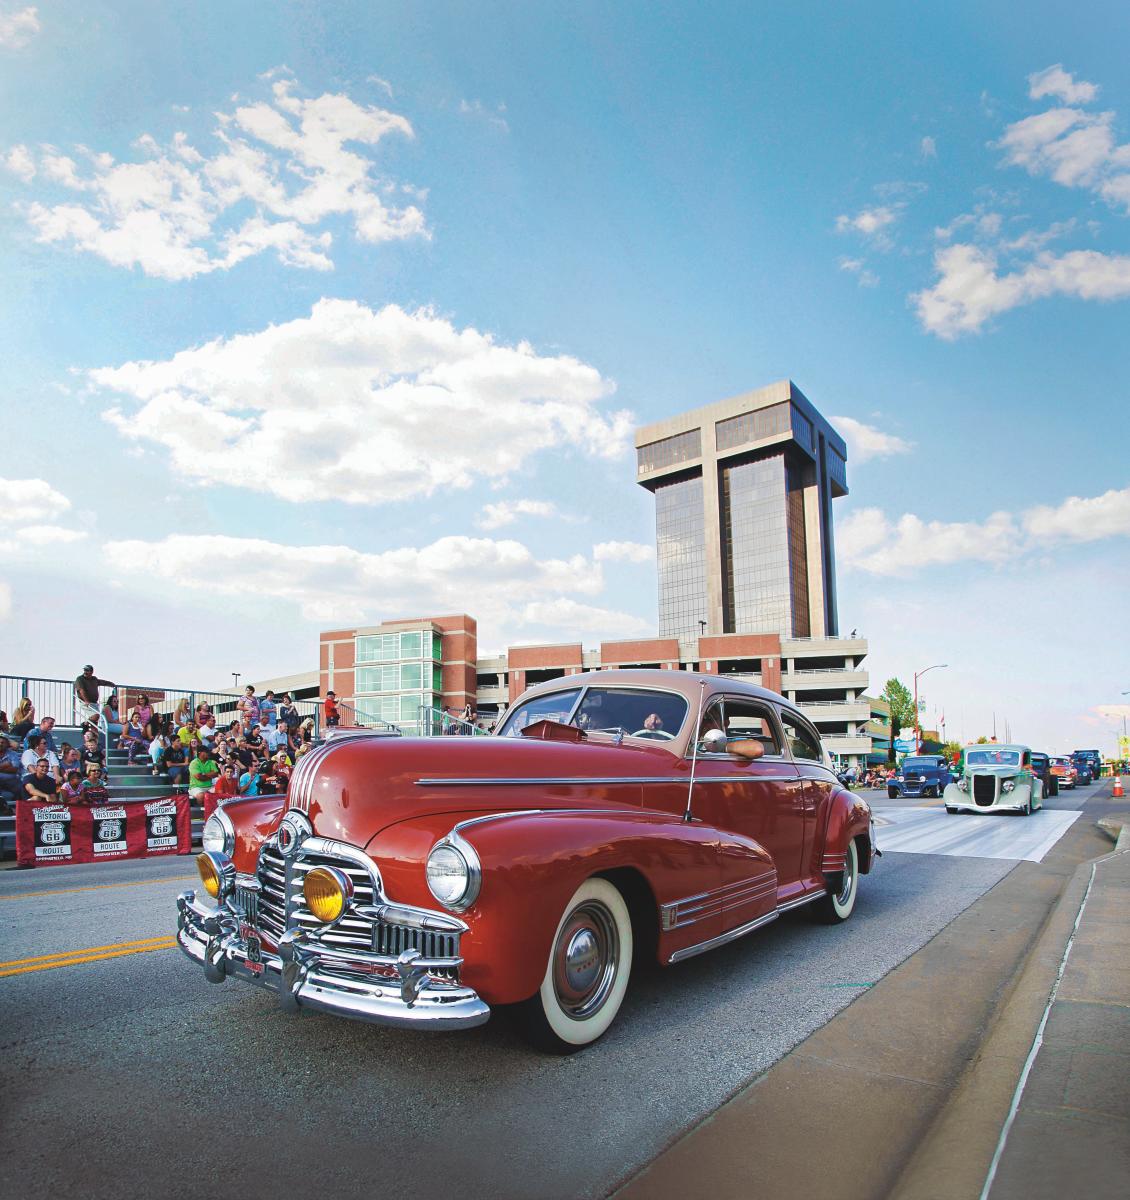 So where is the 'birthplace of Route 66?” –